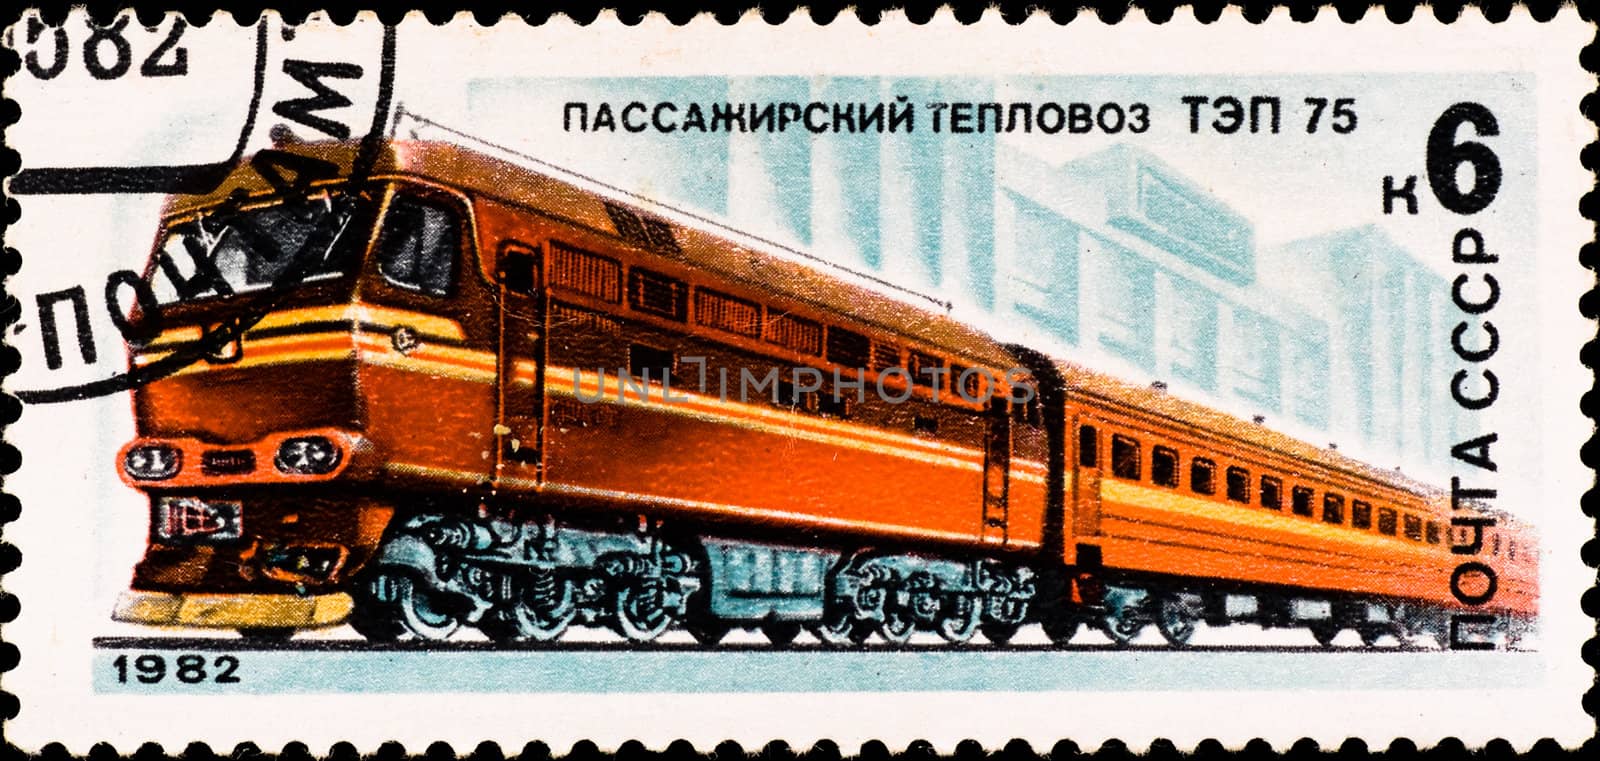 postage stamp shows russian train "TAP-75" by petr_malyshev